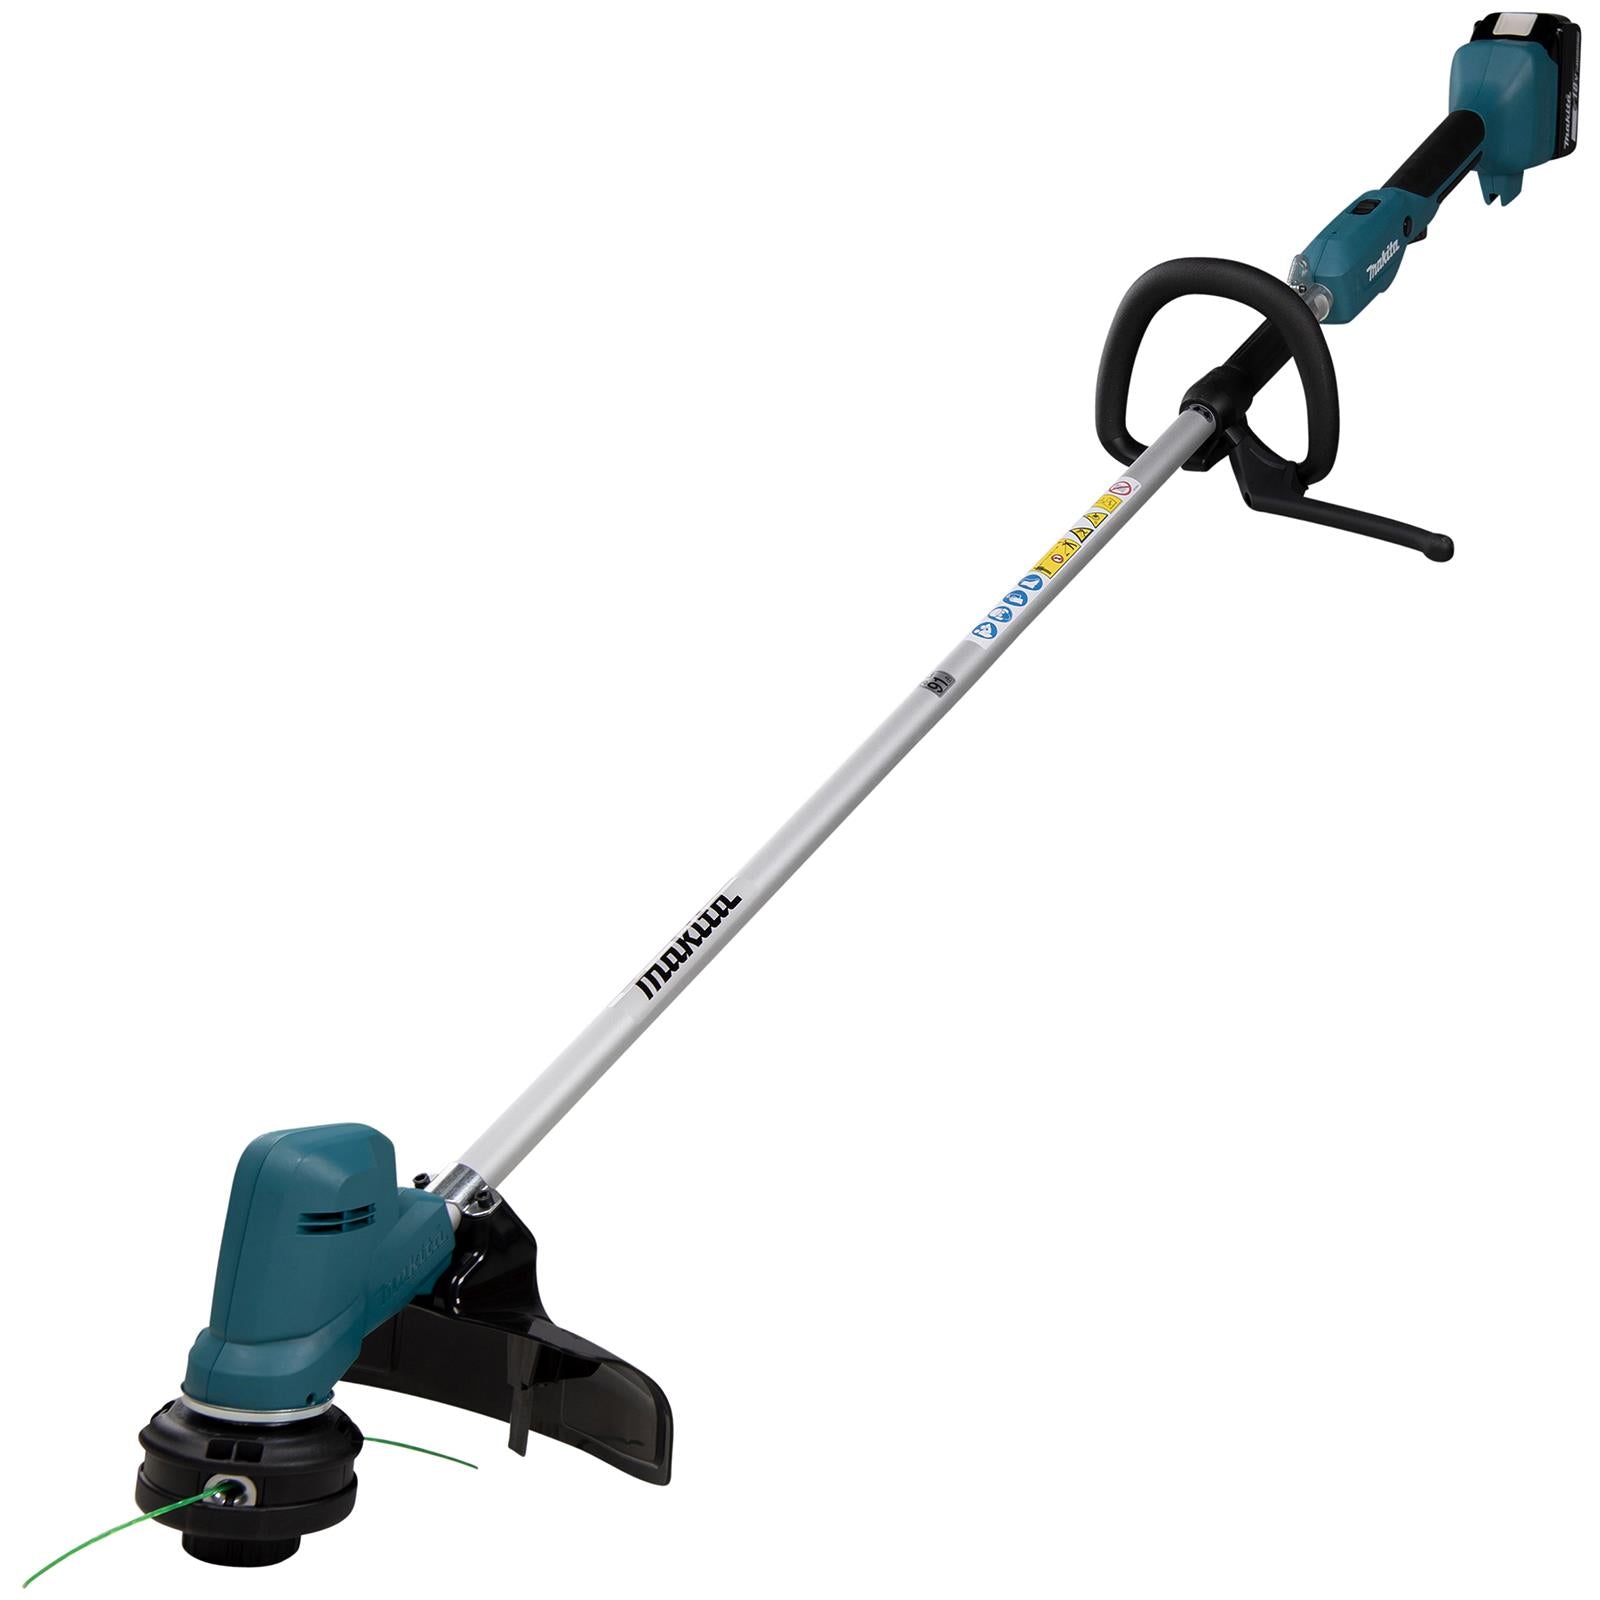 Makita Grass Trimmer Strimmer Kit 18V LXT Brushless Cordless Garden Lawn Strimming 5Ah Battery and Charger DUR194RTX2